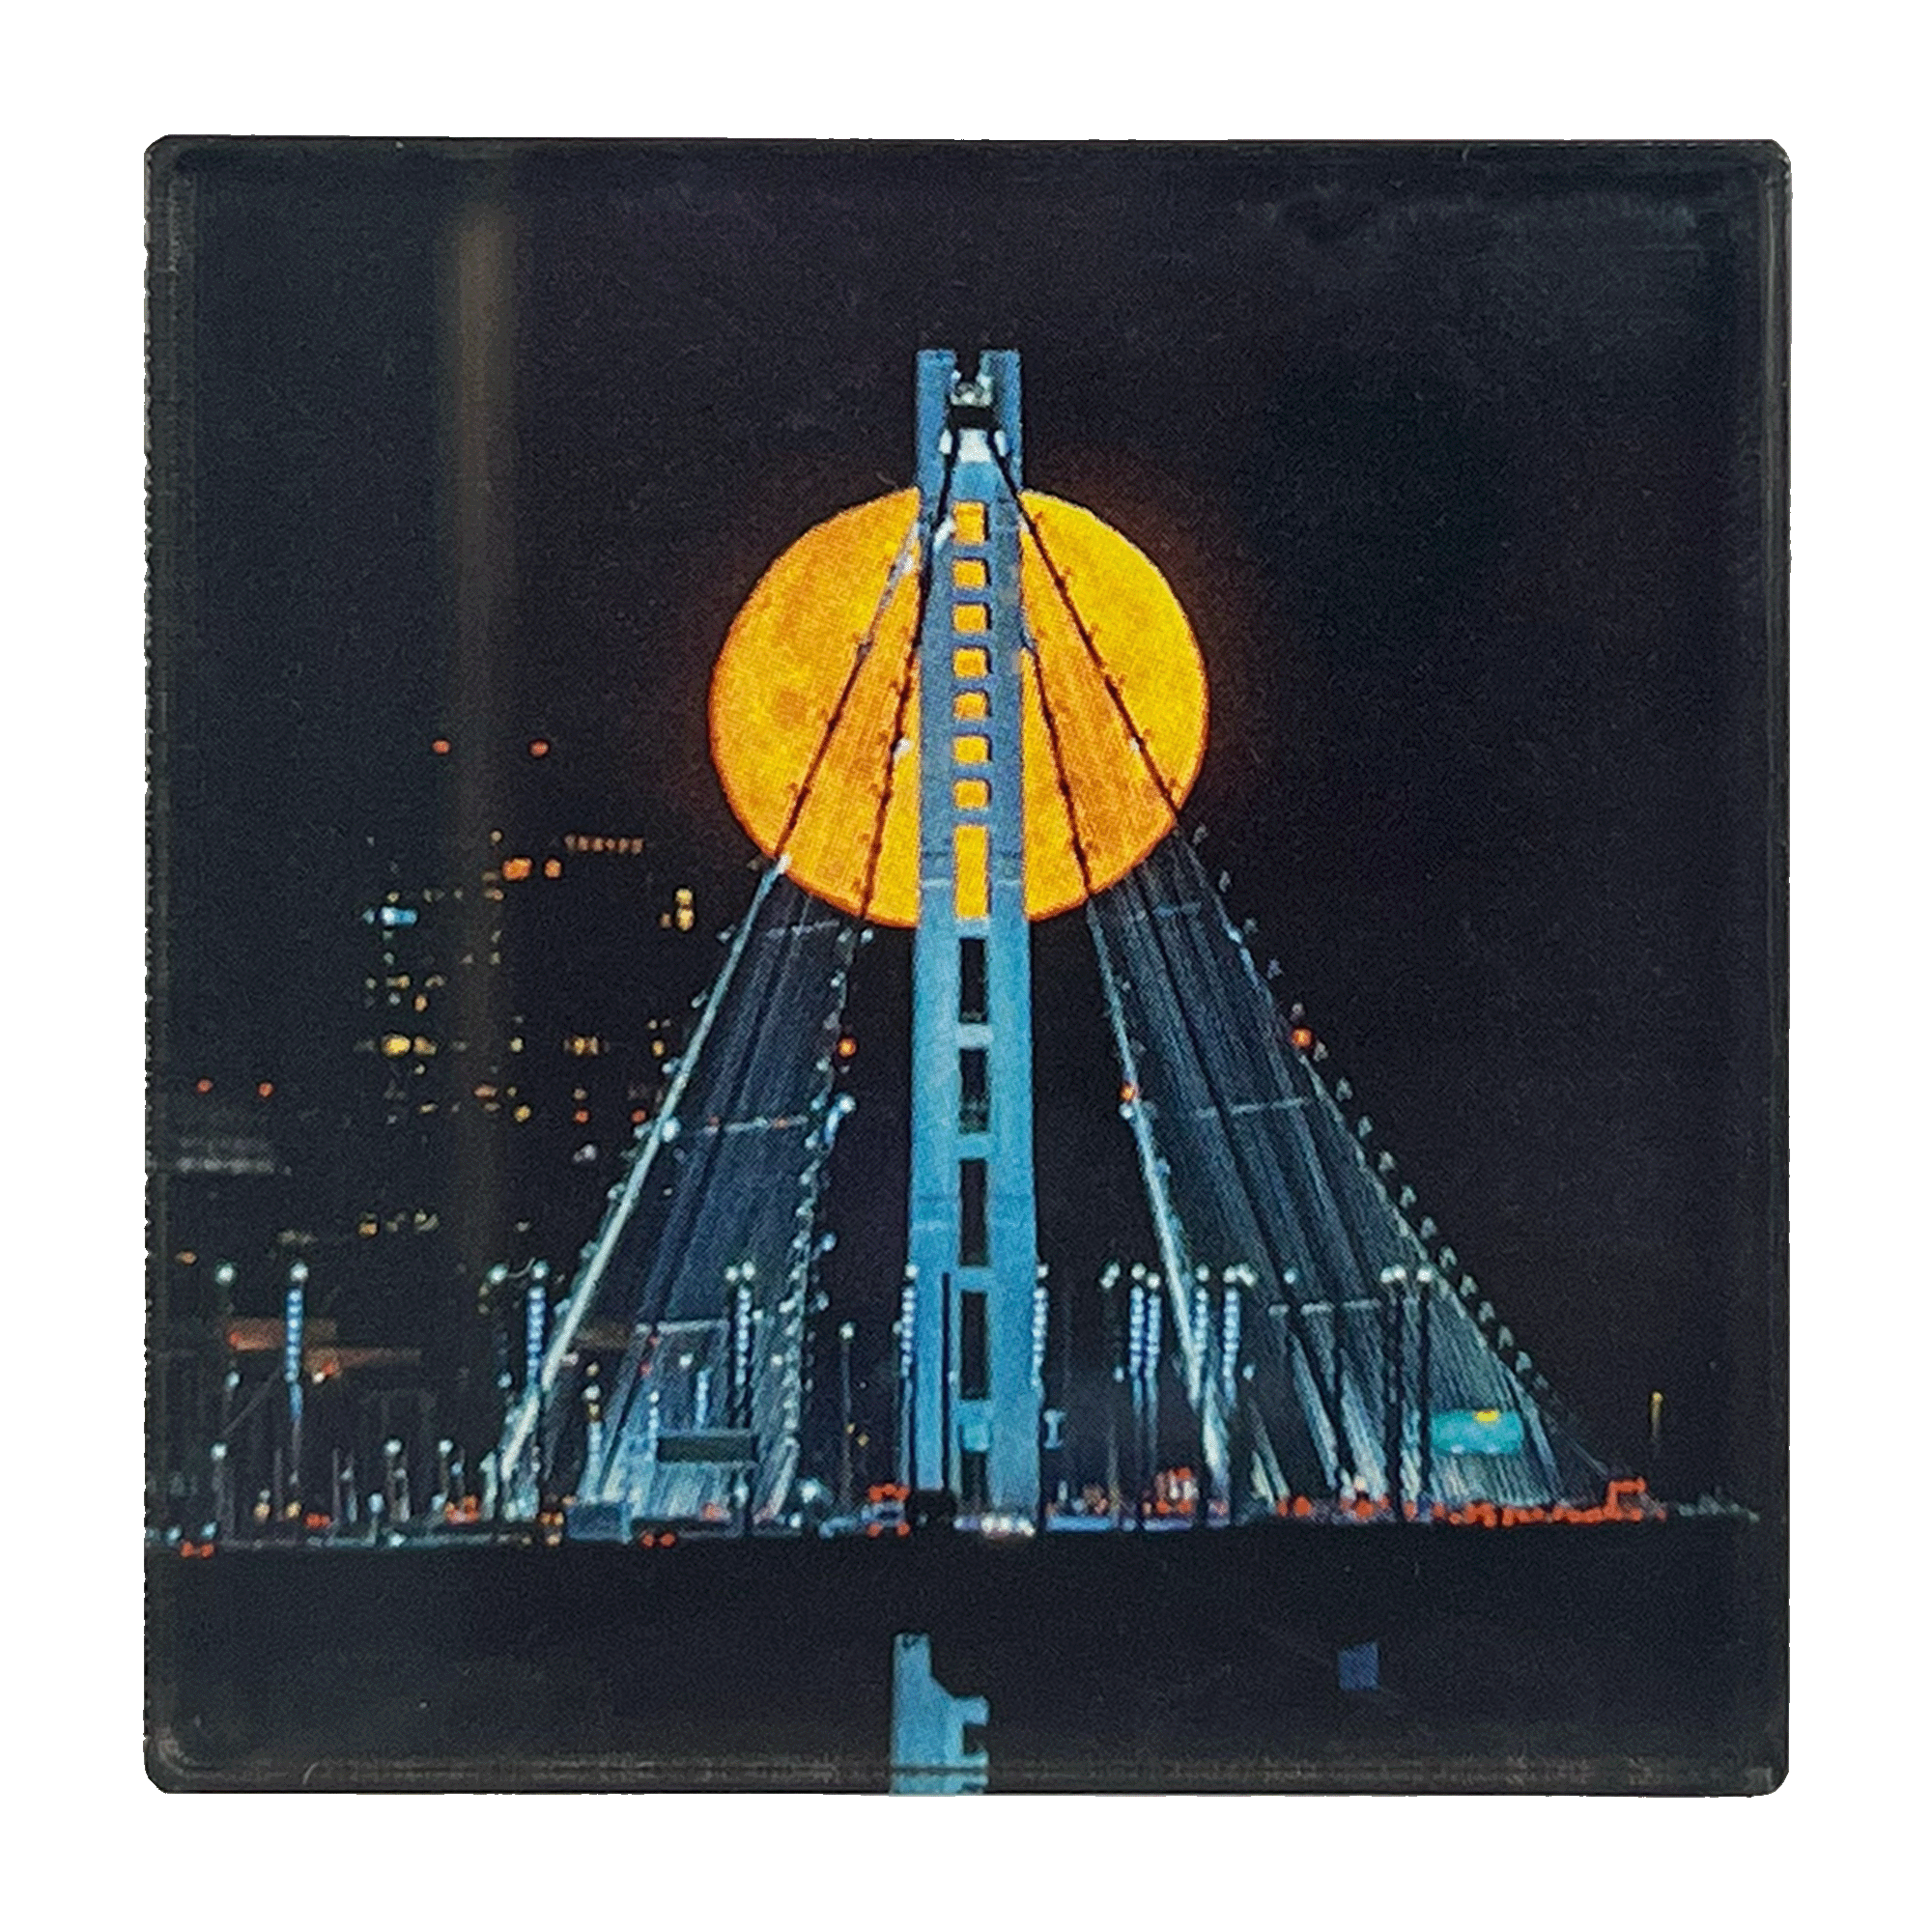 Image of full moon over Oakland's Bay Bridge by photographer Vincent James.